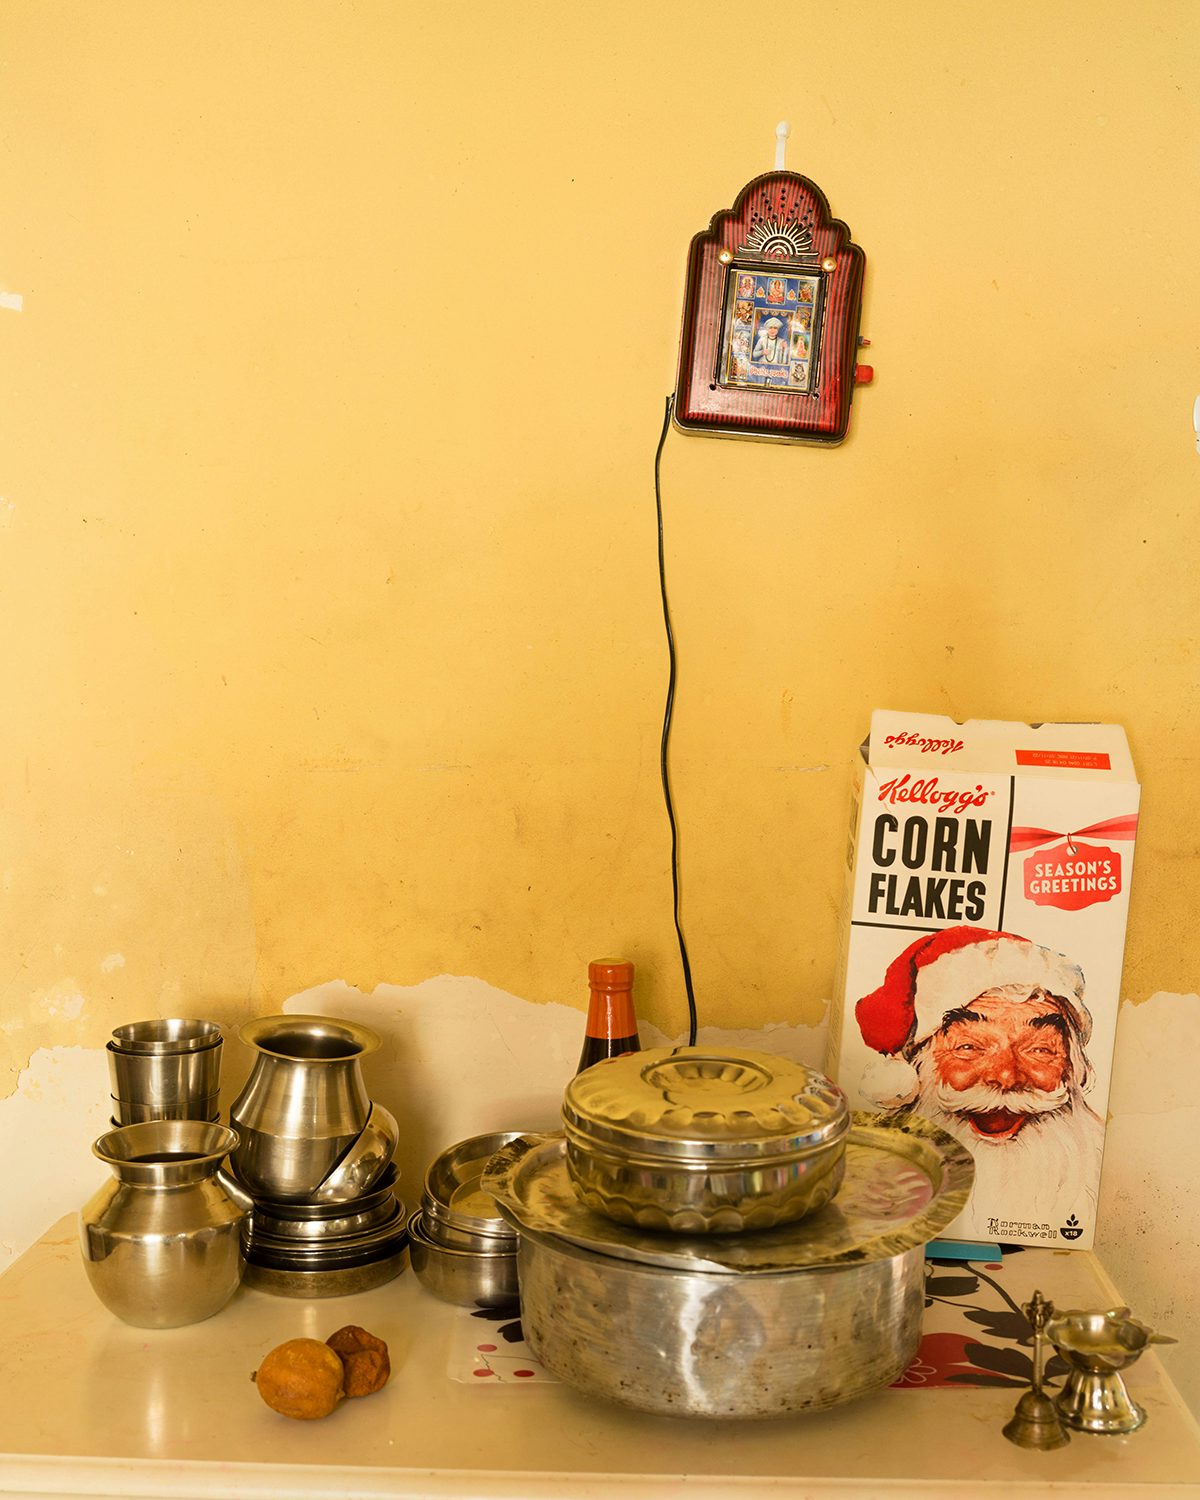 Image shows kitchenware and a box of Cornflakes, taken from Kavi Pujara's book This Golden Mile